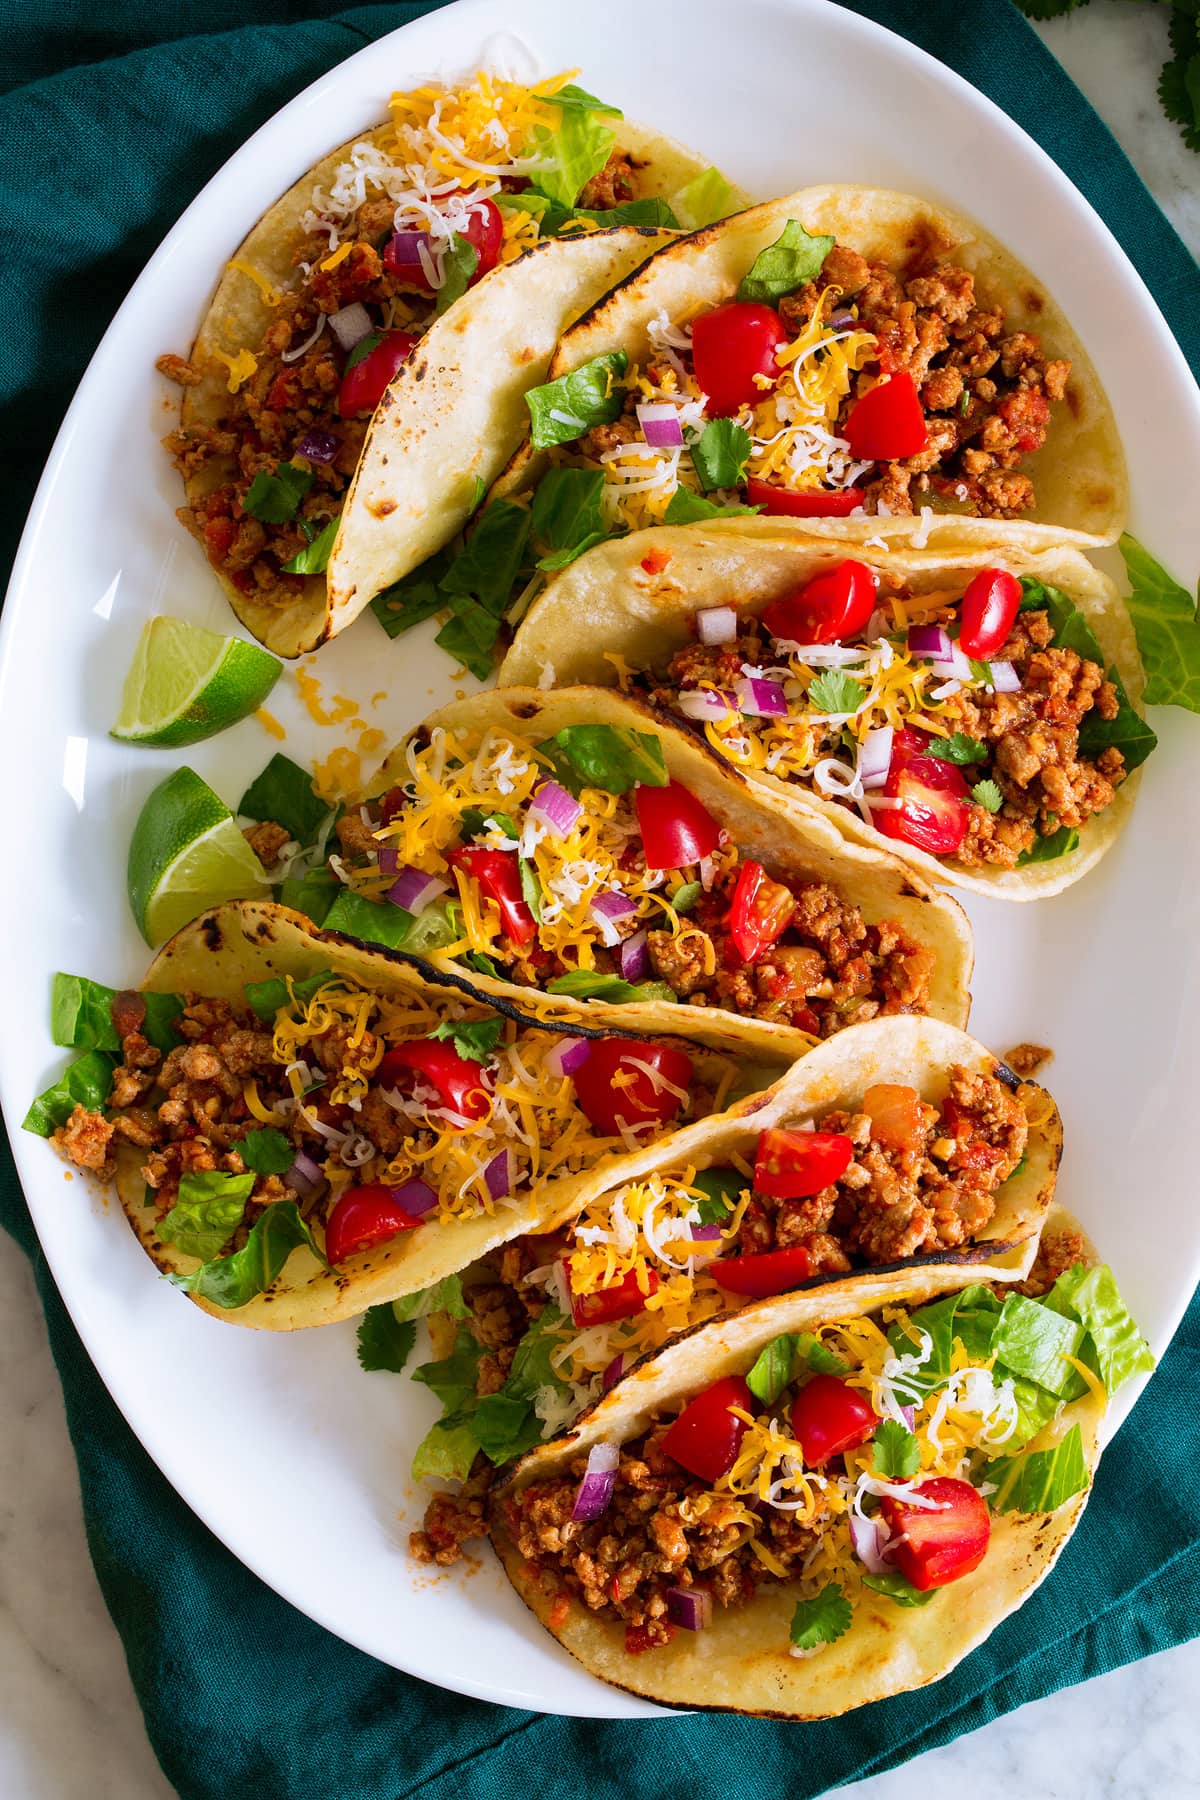 Photo: 7 ground turkey tacos in a row shown on a white oval platter from above. Tacos are filled with meat, tomatoes, lettuce, cheese and red onion.